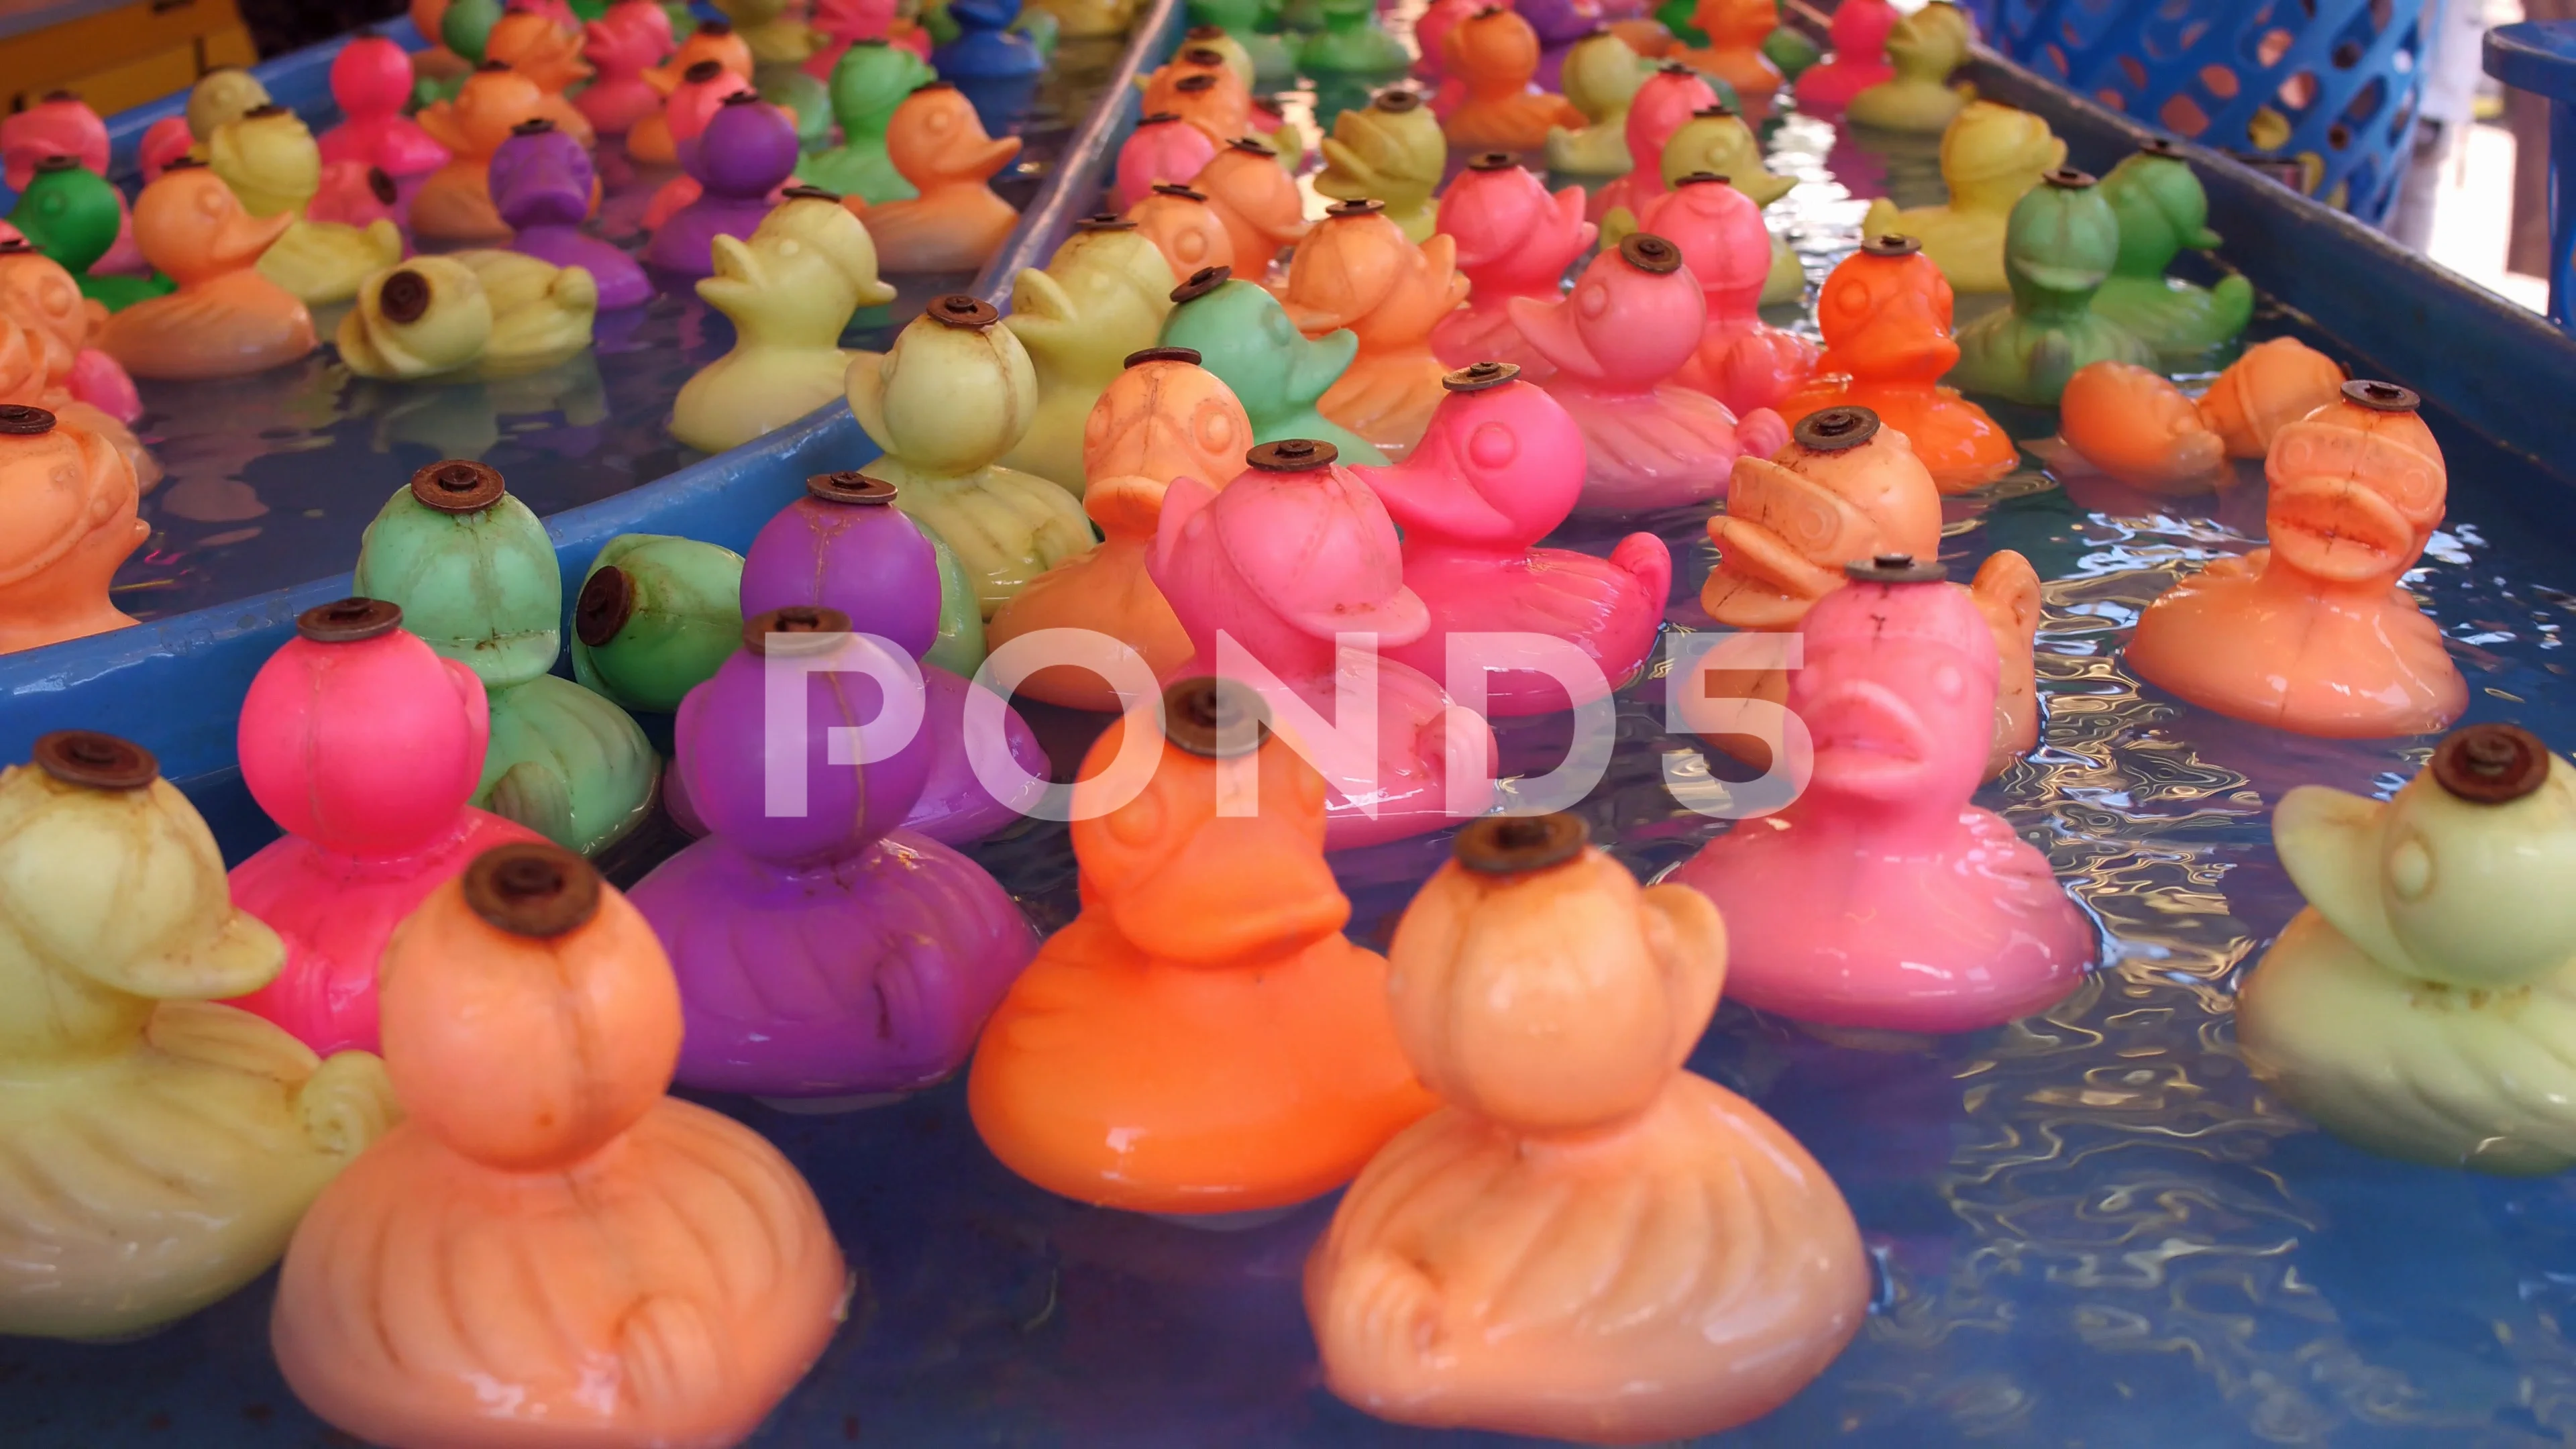 Duck fishing game at carnival 4k, Stock Video